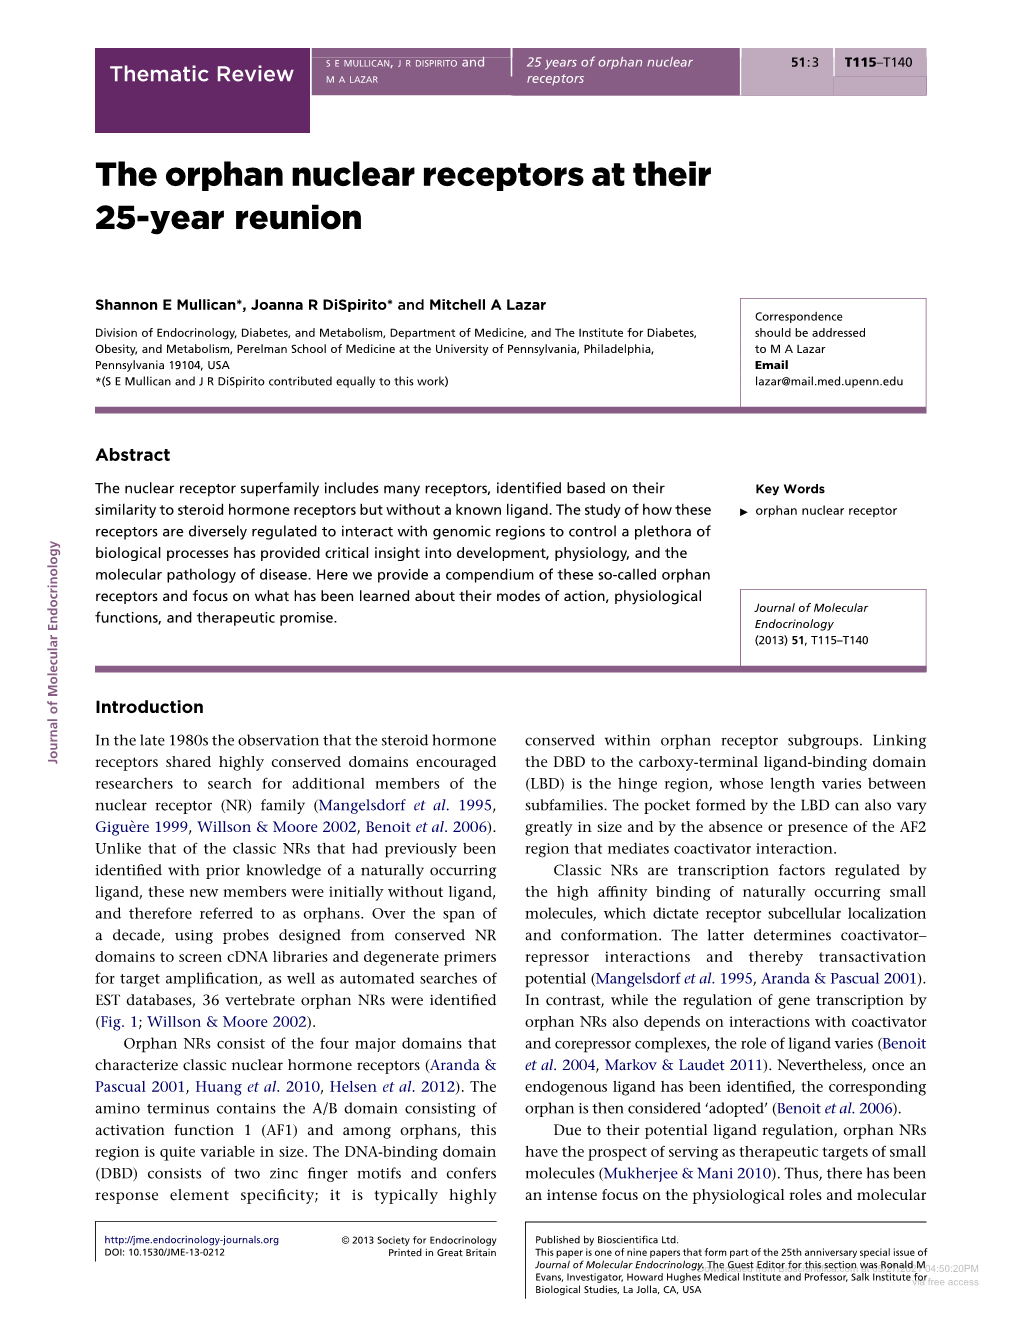 The Orphan Nuclear Receptors at Their 25-Year Reunion